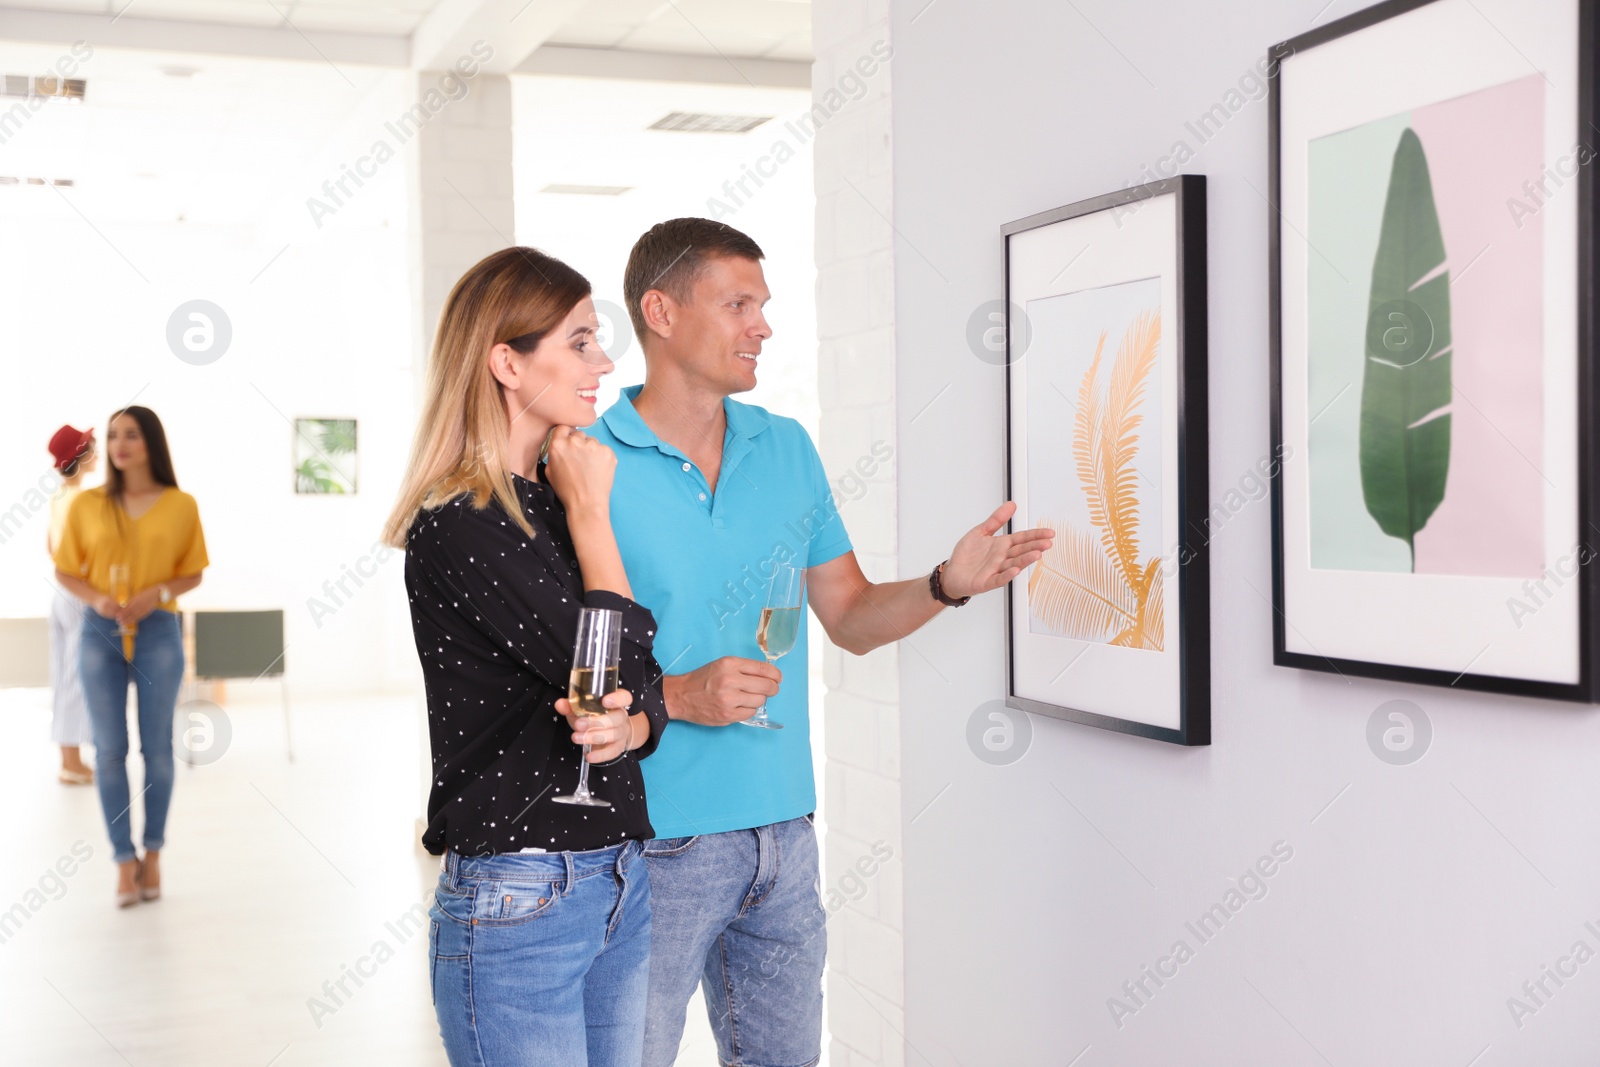 Photo of Couple at exhibition in art gallery